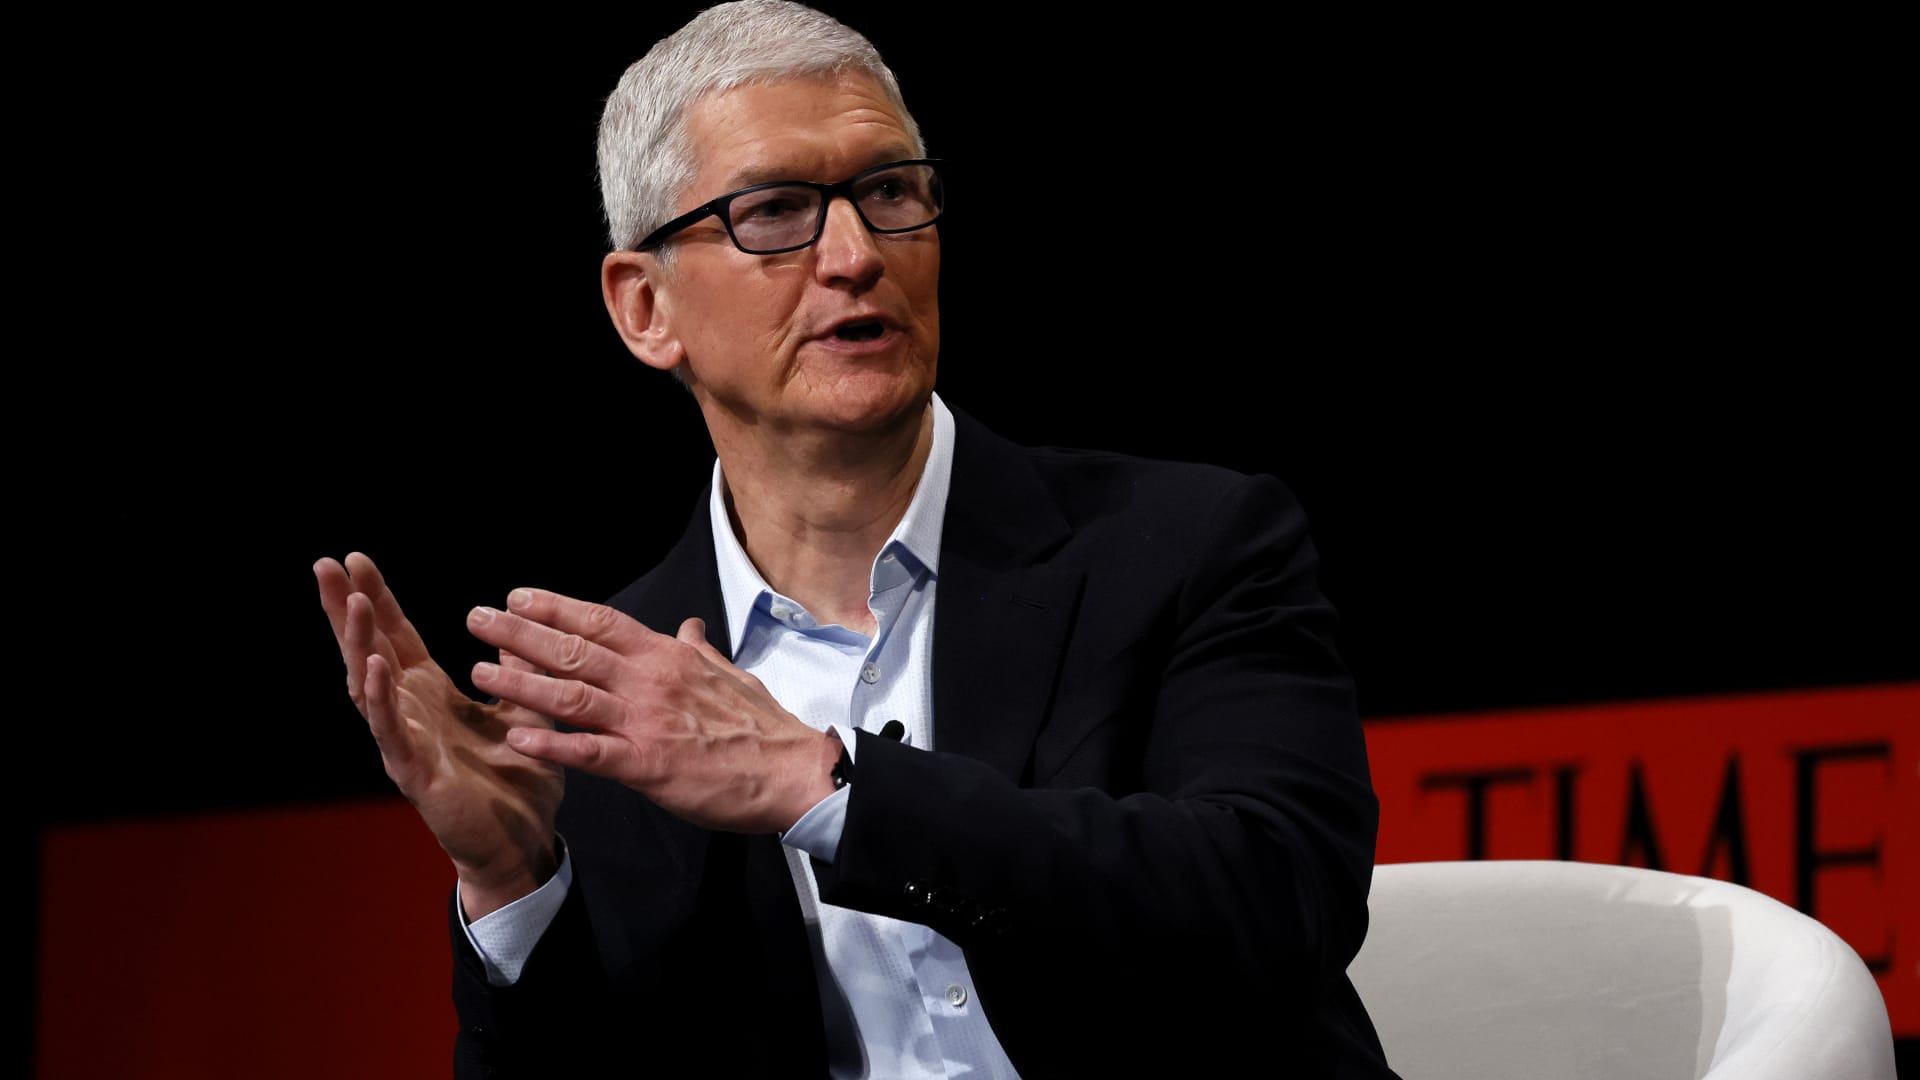 Apple CEO Tim Cook pushes for privacy legislation ‘as soon as possible’ after visit to Congress